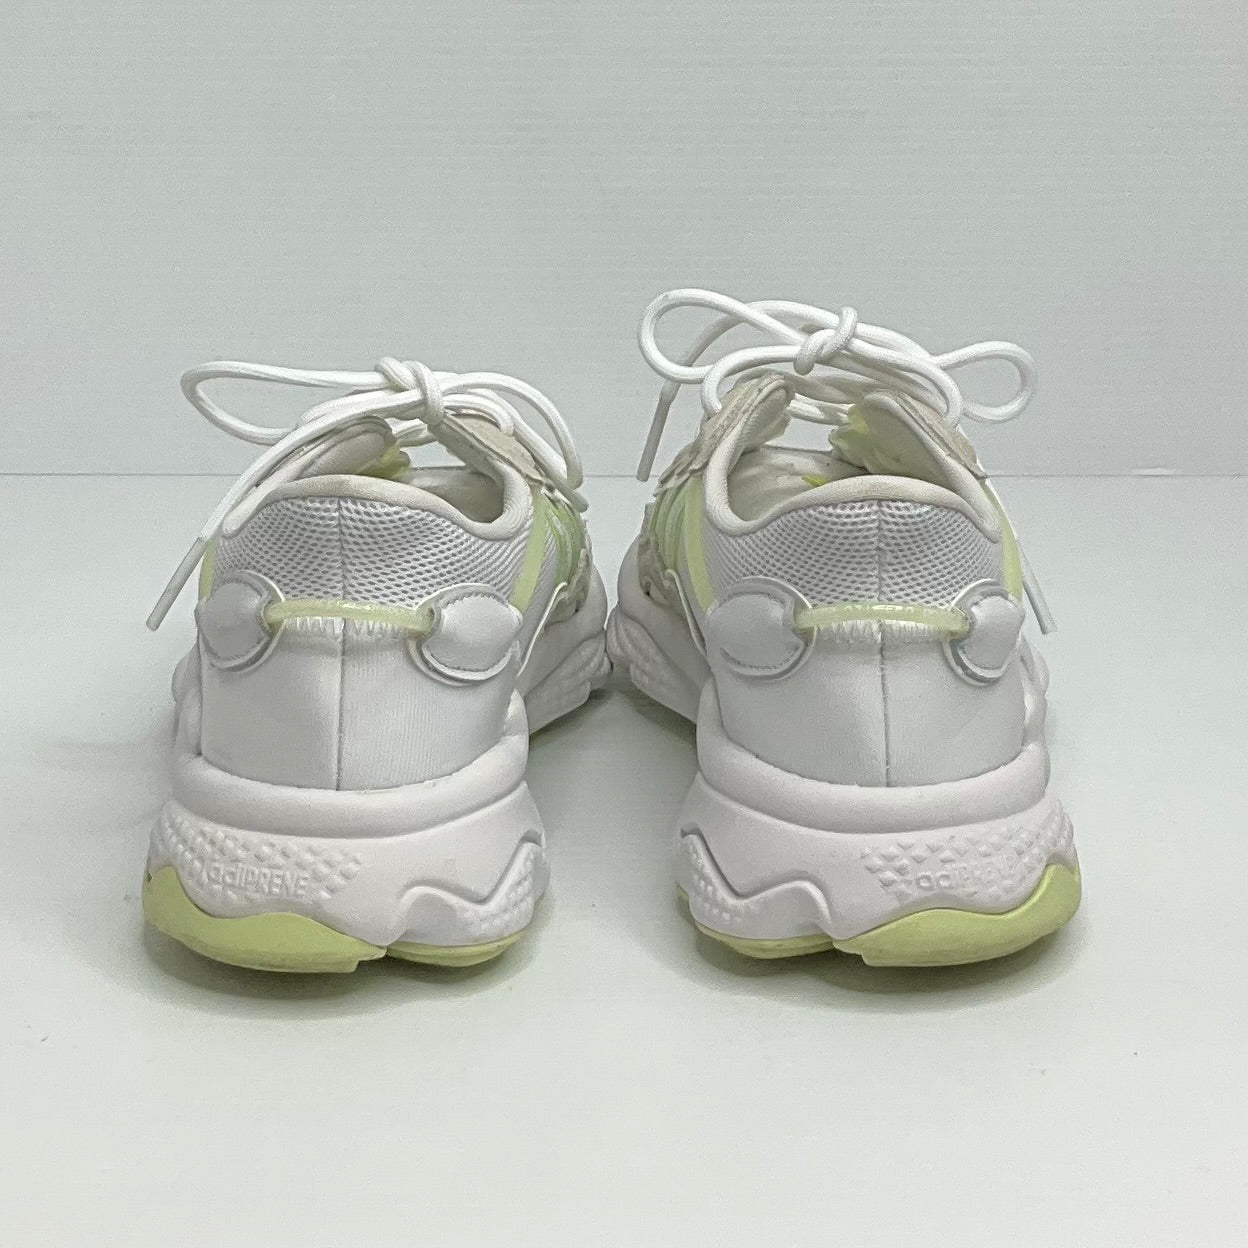 White Shoes Sneakers Adidas, Size 8.5